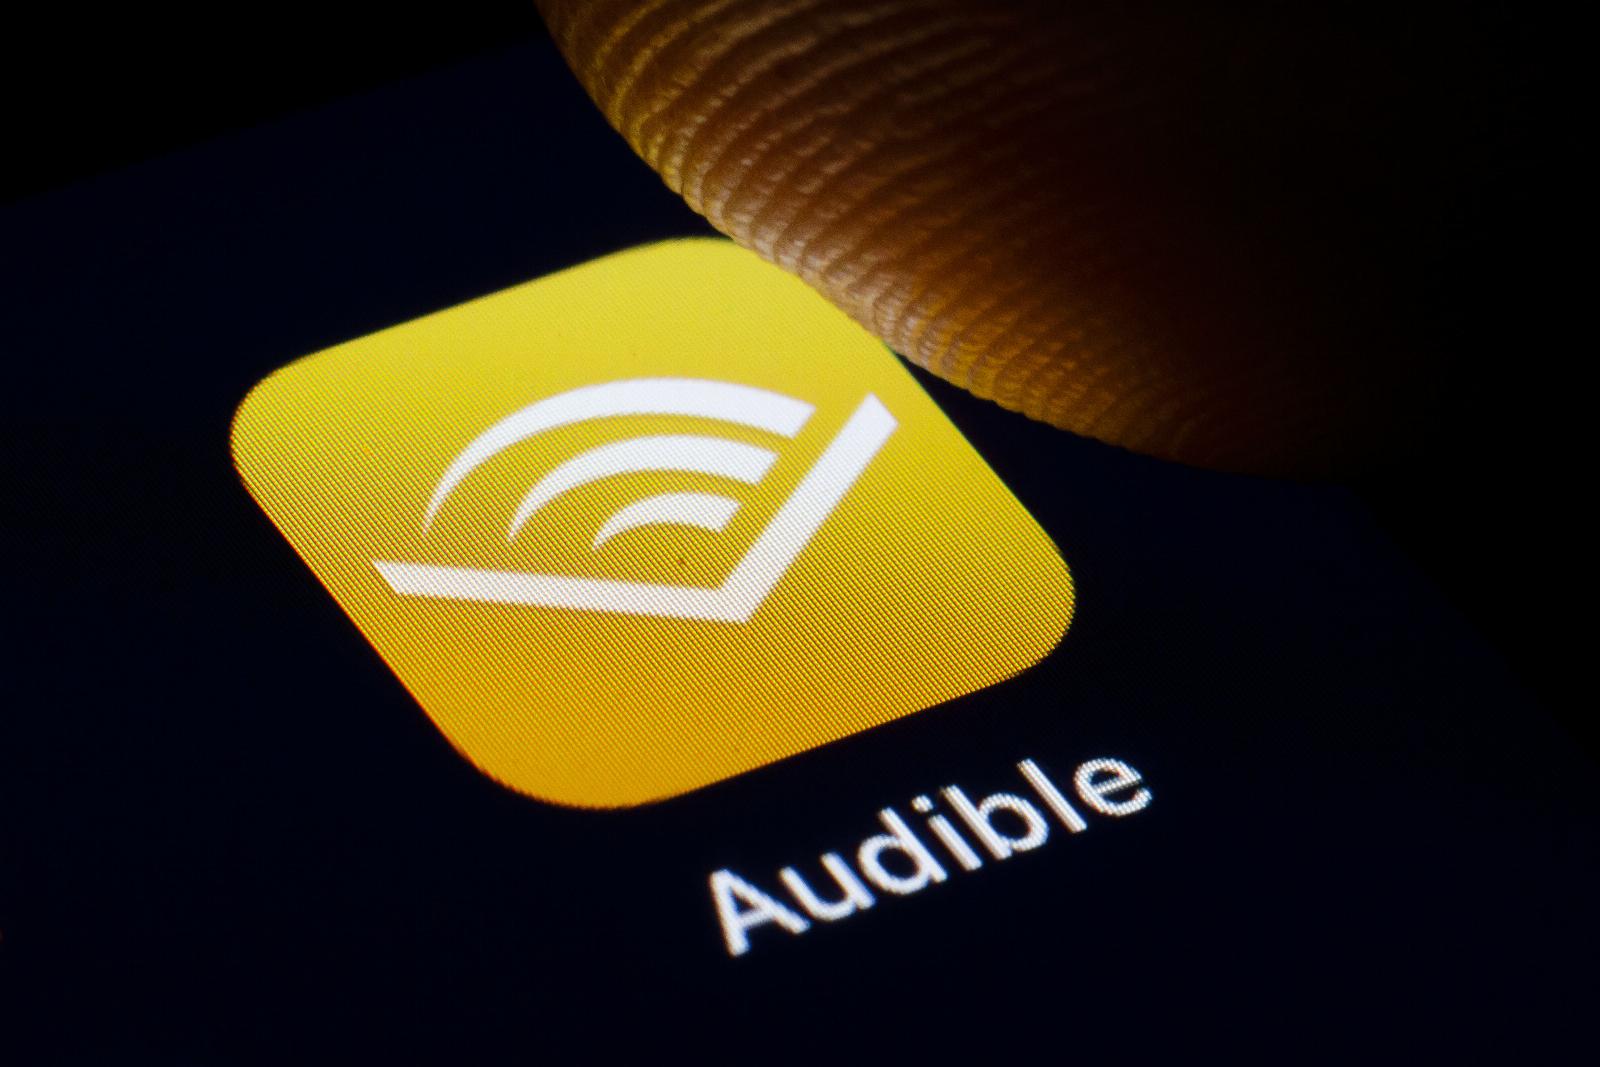 Audible is testing ad-supported access to select titles for non-members